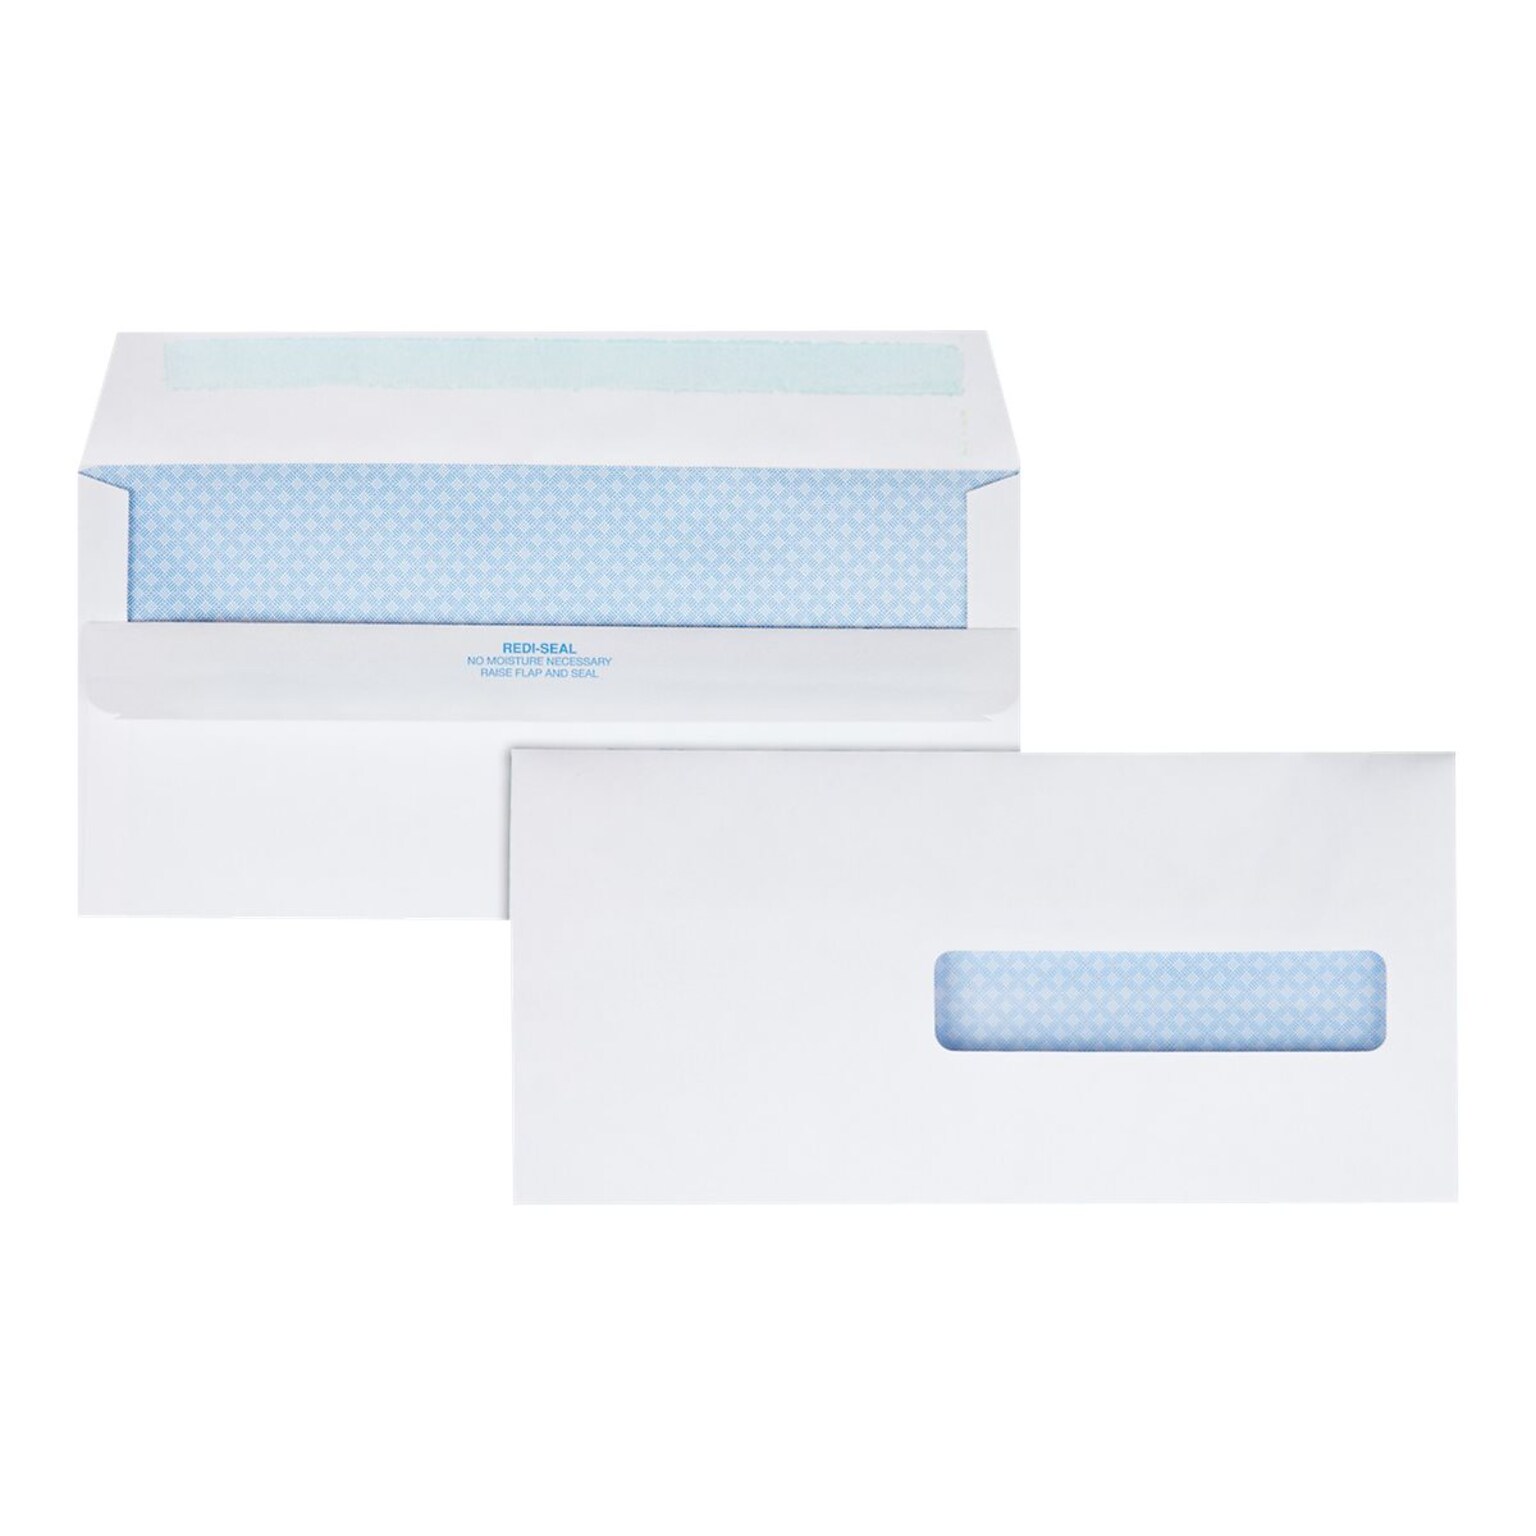 Quality Park Redi-Seal Security Tinted Window Envelope, 4 1/2 x 9 1/2, Woven White, 500/Box (21438)